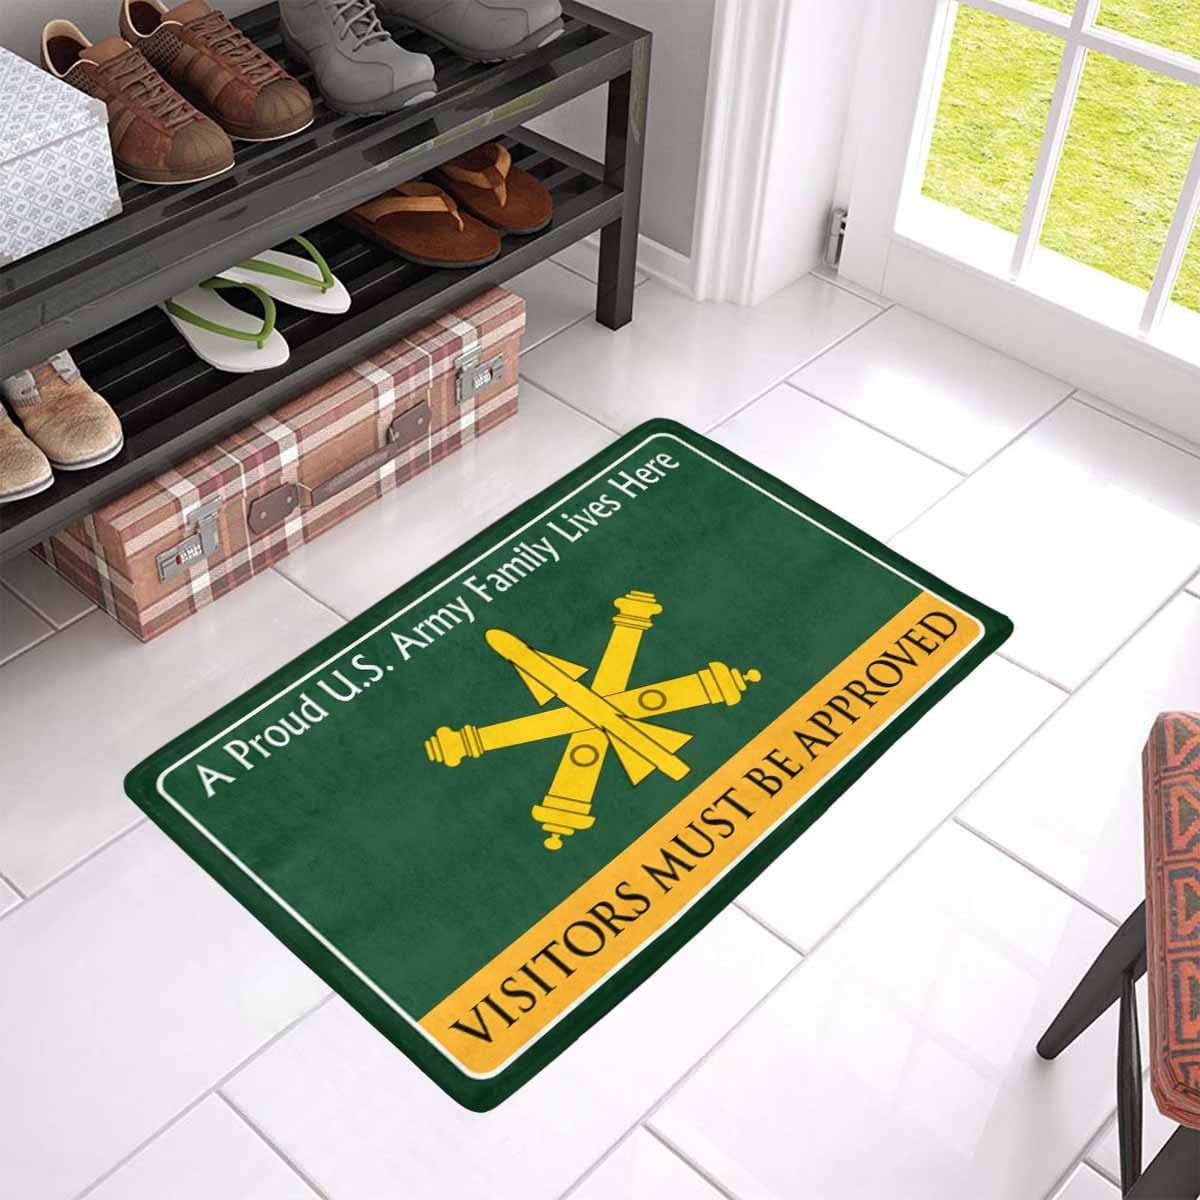 US Army Air Defense Artillery Family Doormat - Visitors must be approved Doormat (23.6 inches x 15.7 inches)-Doormat-Army-Branch-Veterans Nation